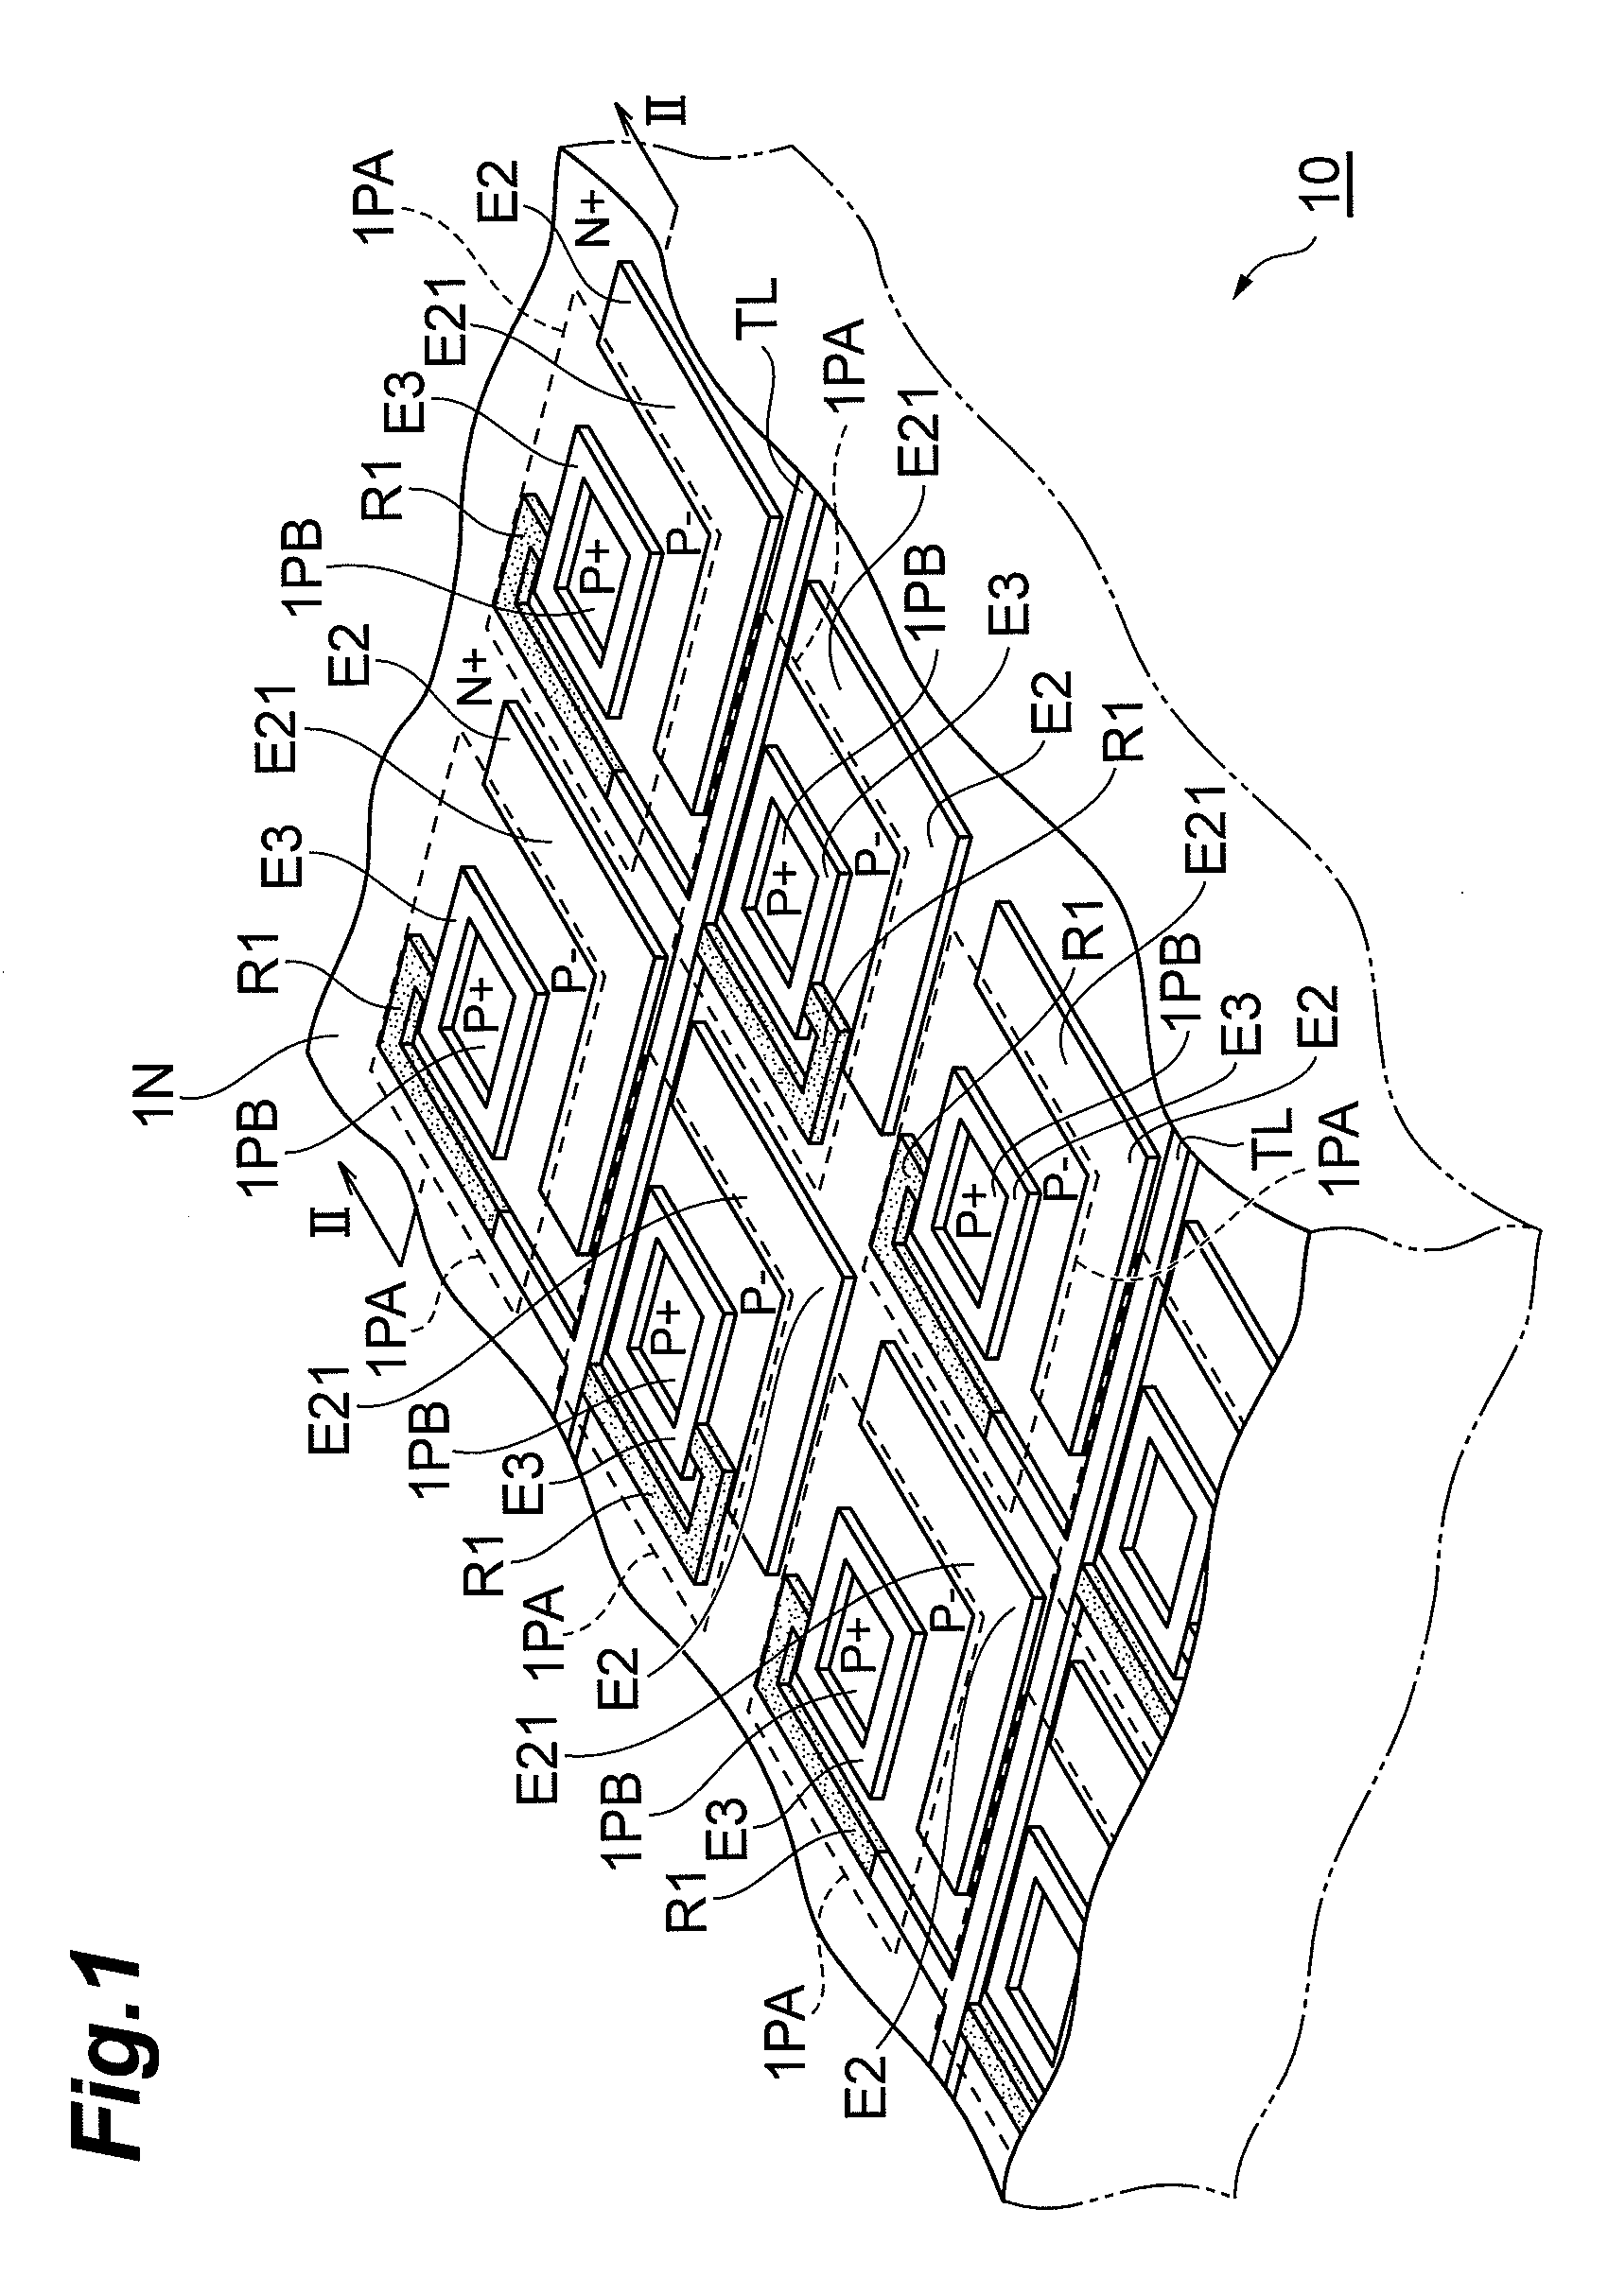 Photodiode array, method for determining reference voltage, and method for determining recommended operating voltage